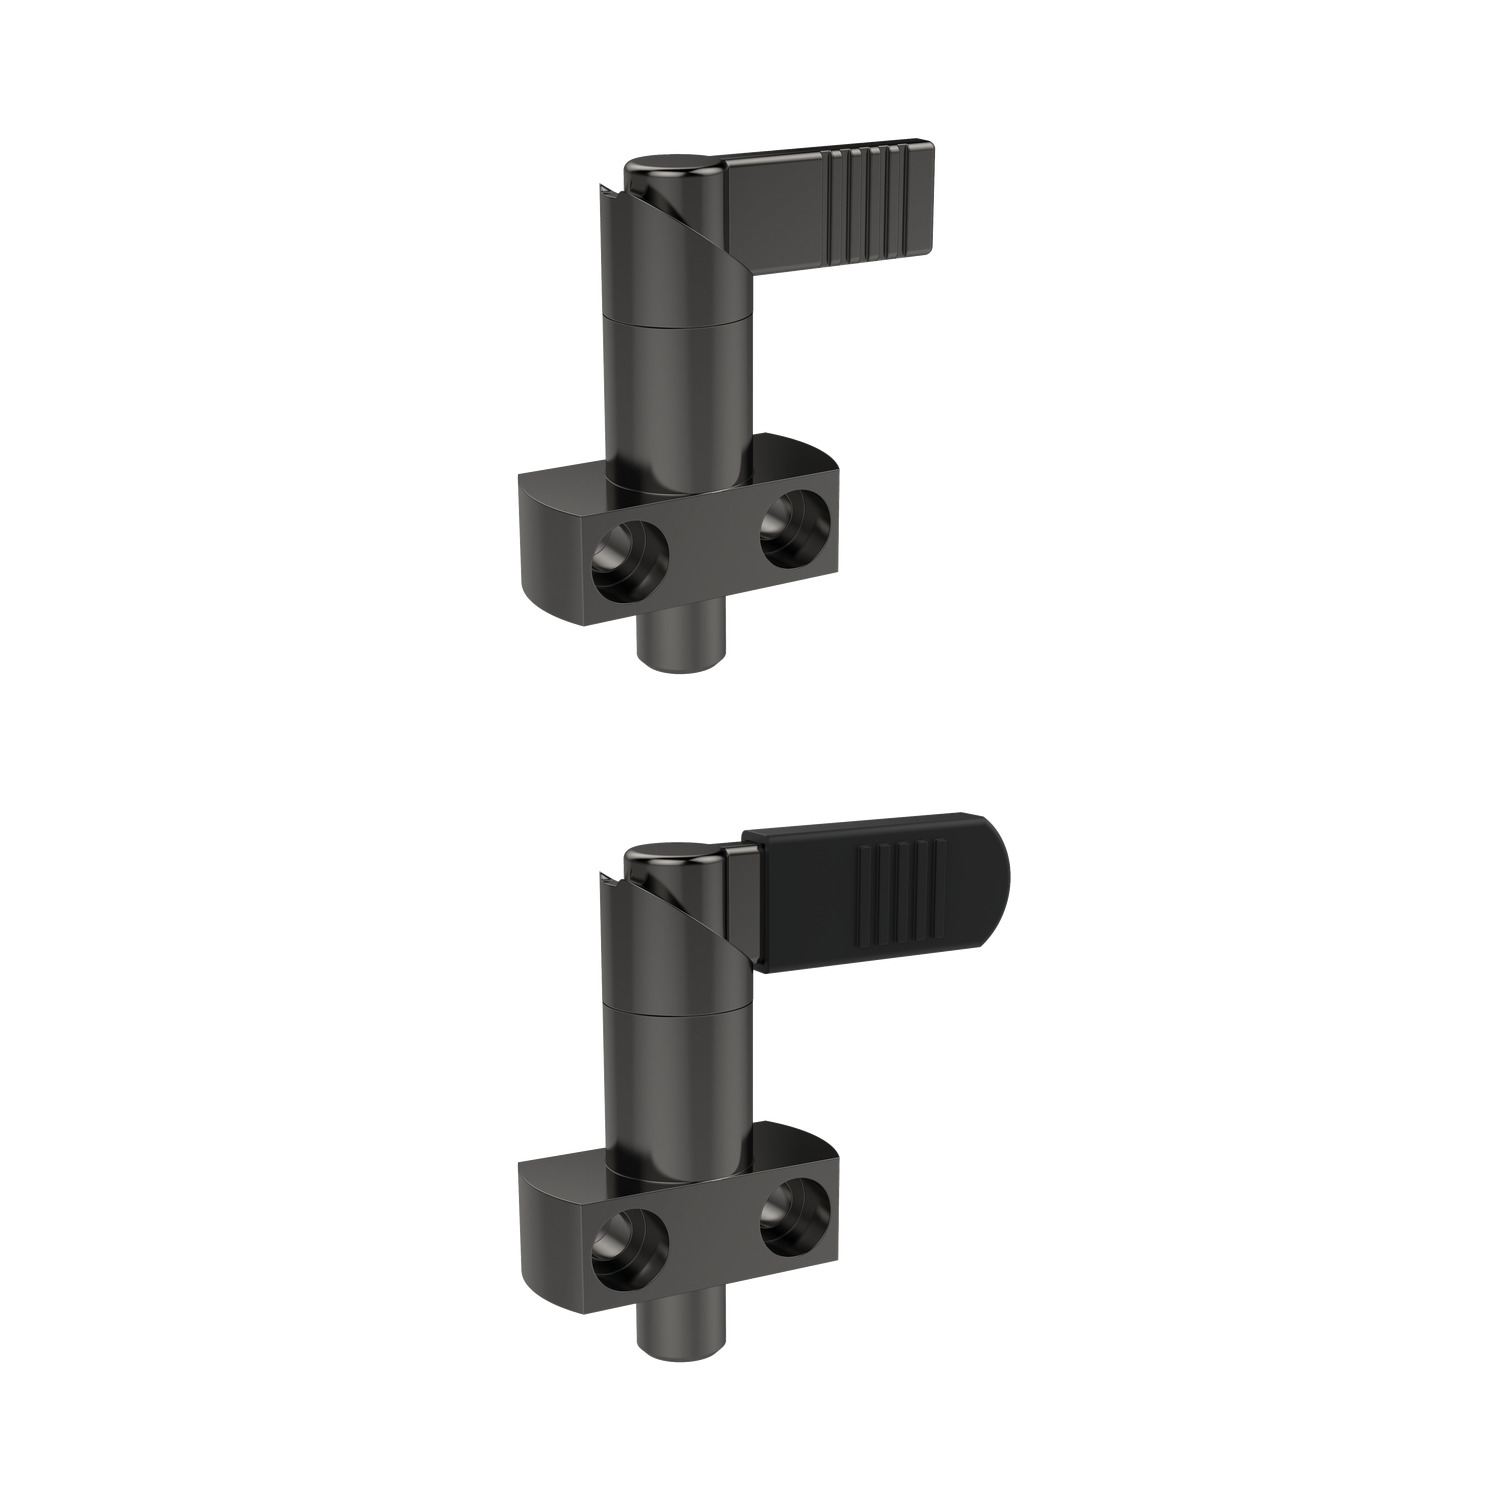 32520.W0394 Index Plungers - Lever Grip - Steel. With Grip - 12 - 12 - 20